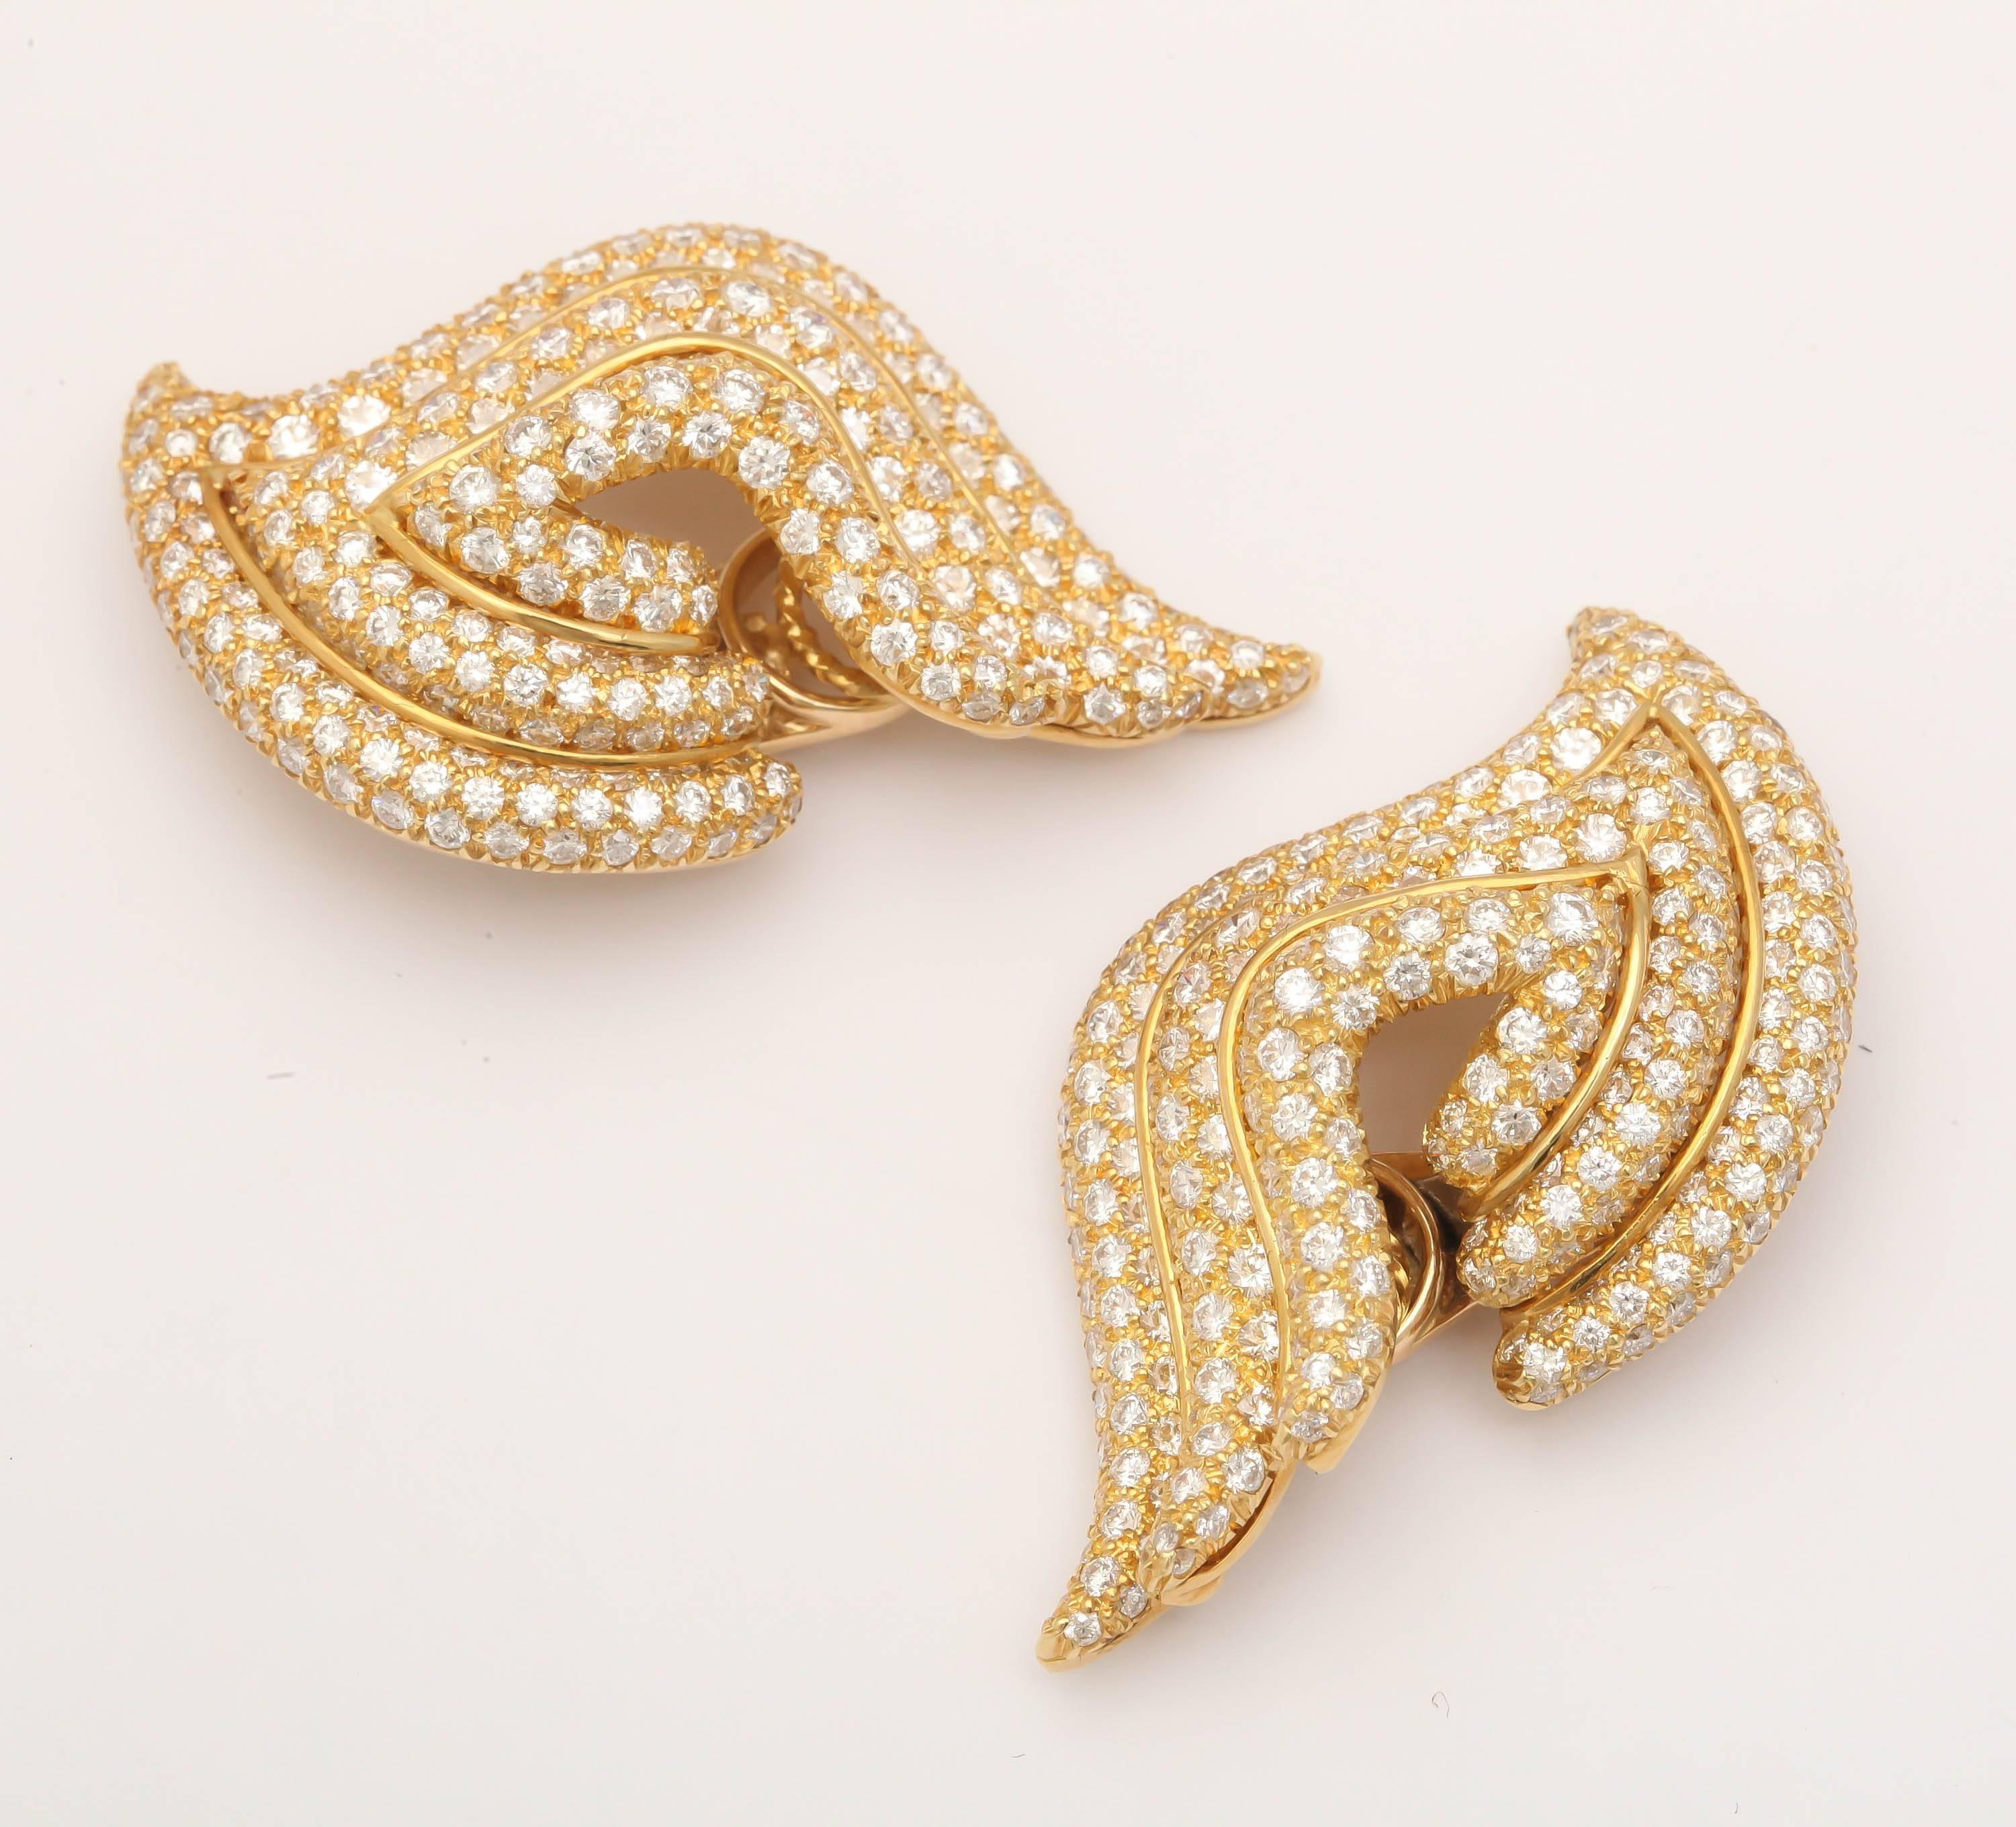 Special Henry Dunay 18t & Yellow Gold & Diamond Earrings.  Ca 1980 - Close to        ten carats.  Wearable but dynamic.  